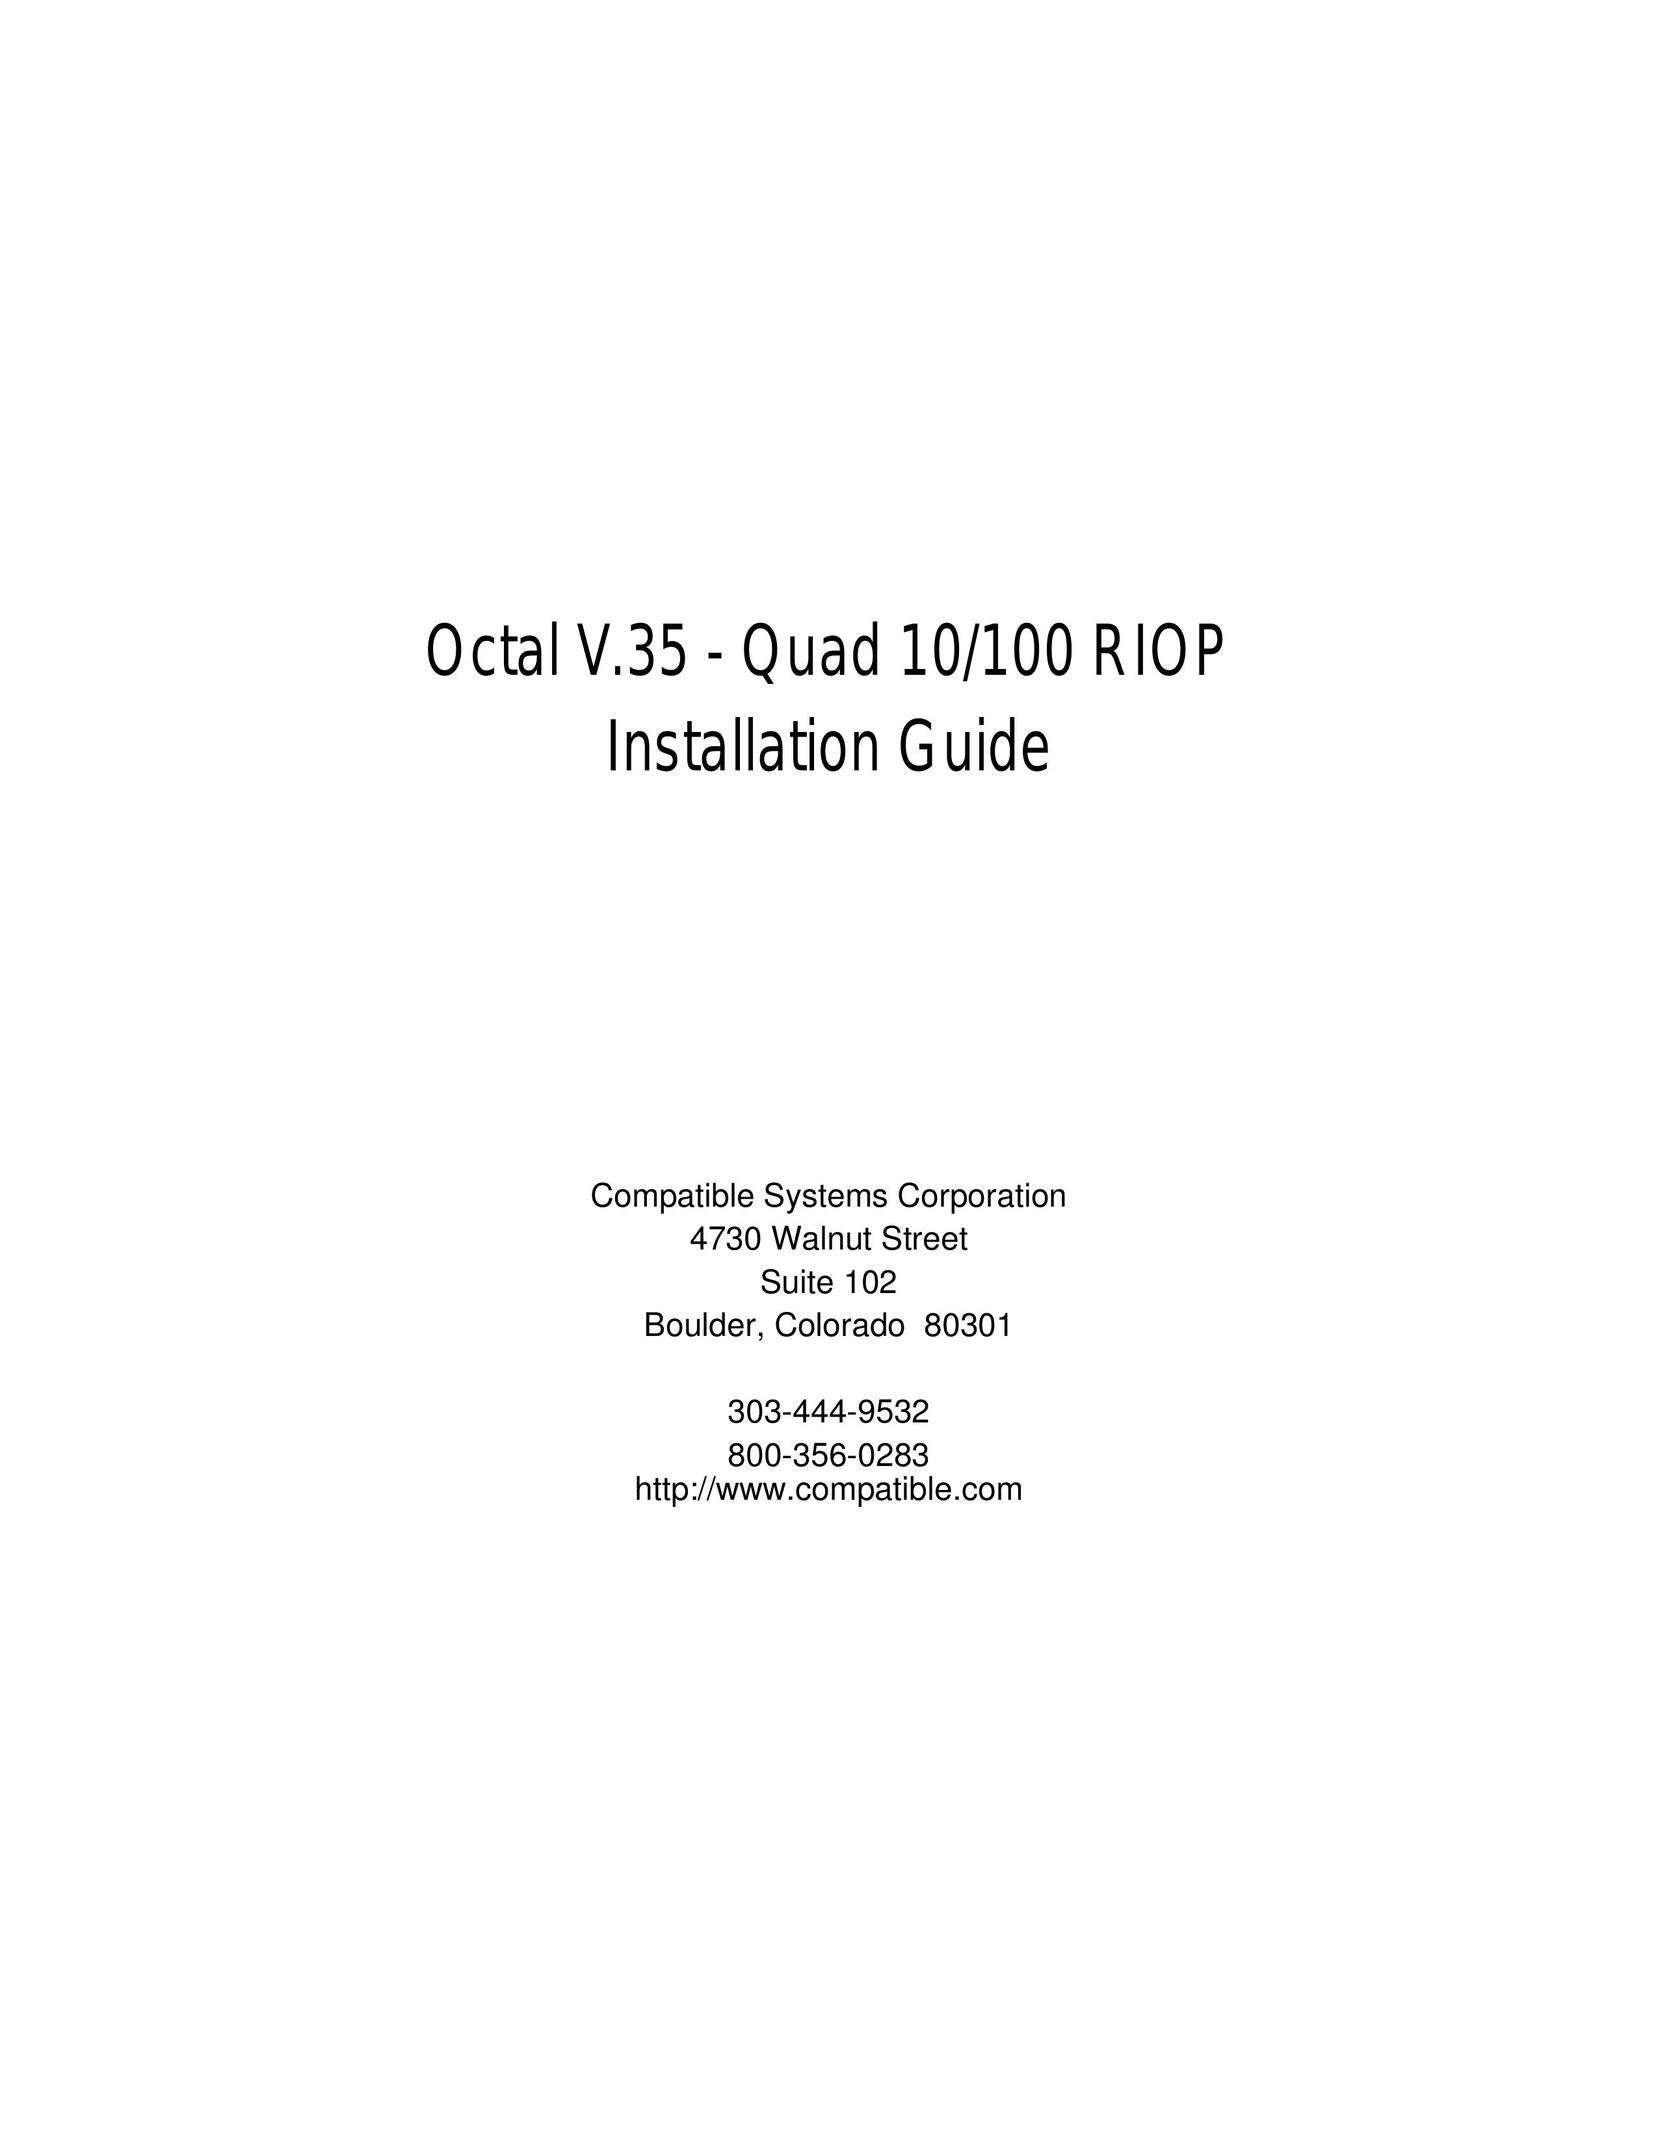 Compatible Systems OCTAL V.35 Network Router User Manual